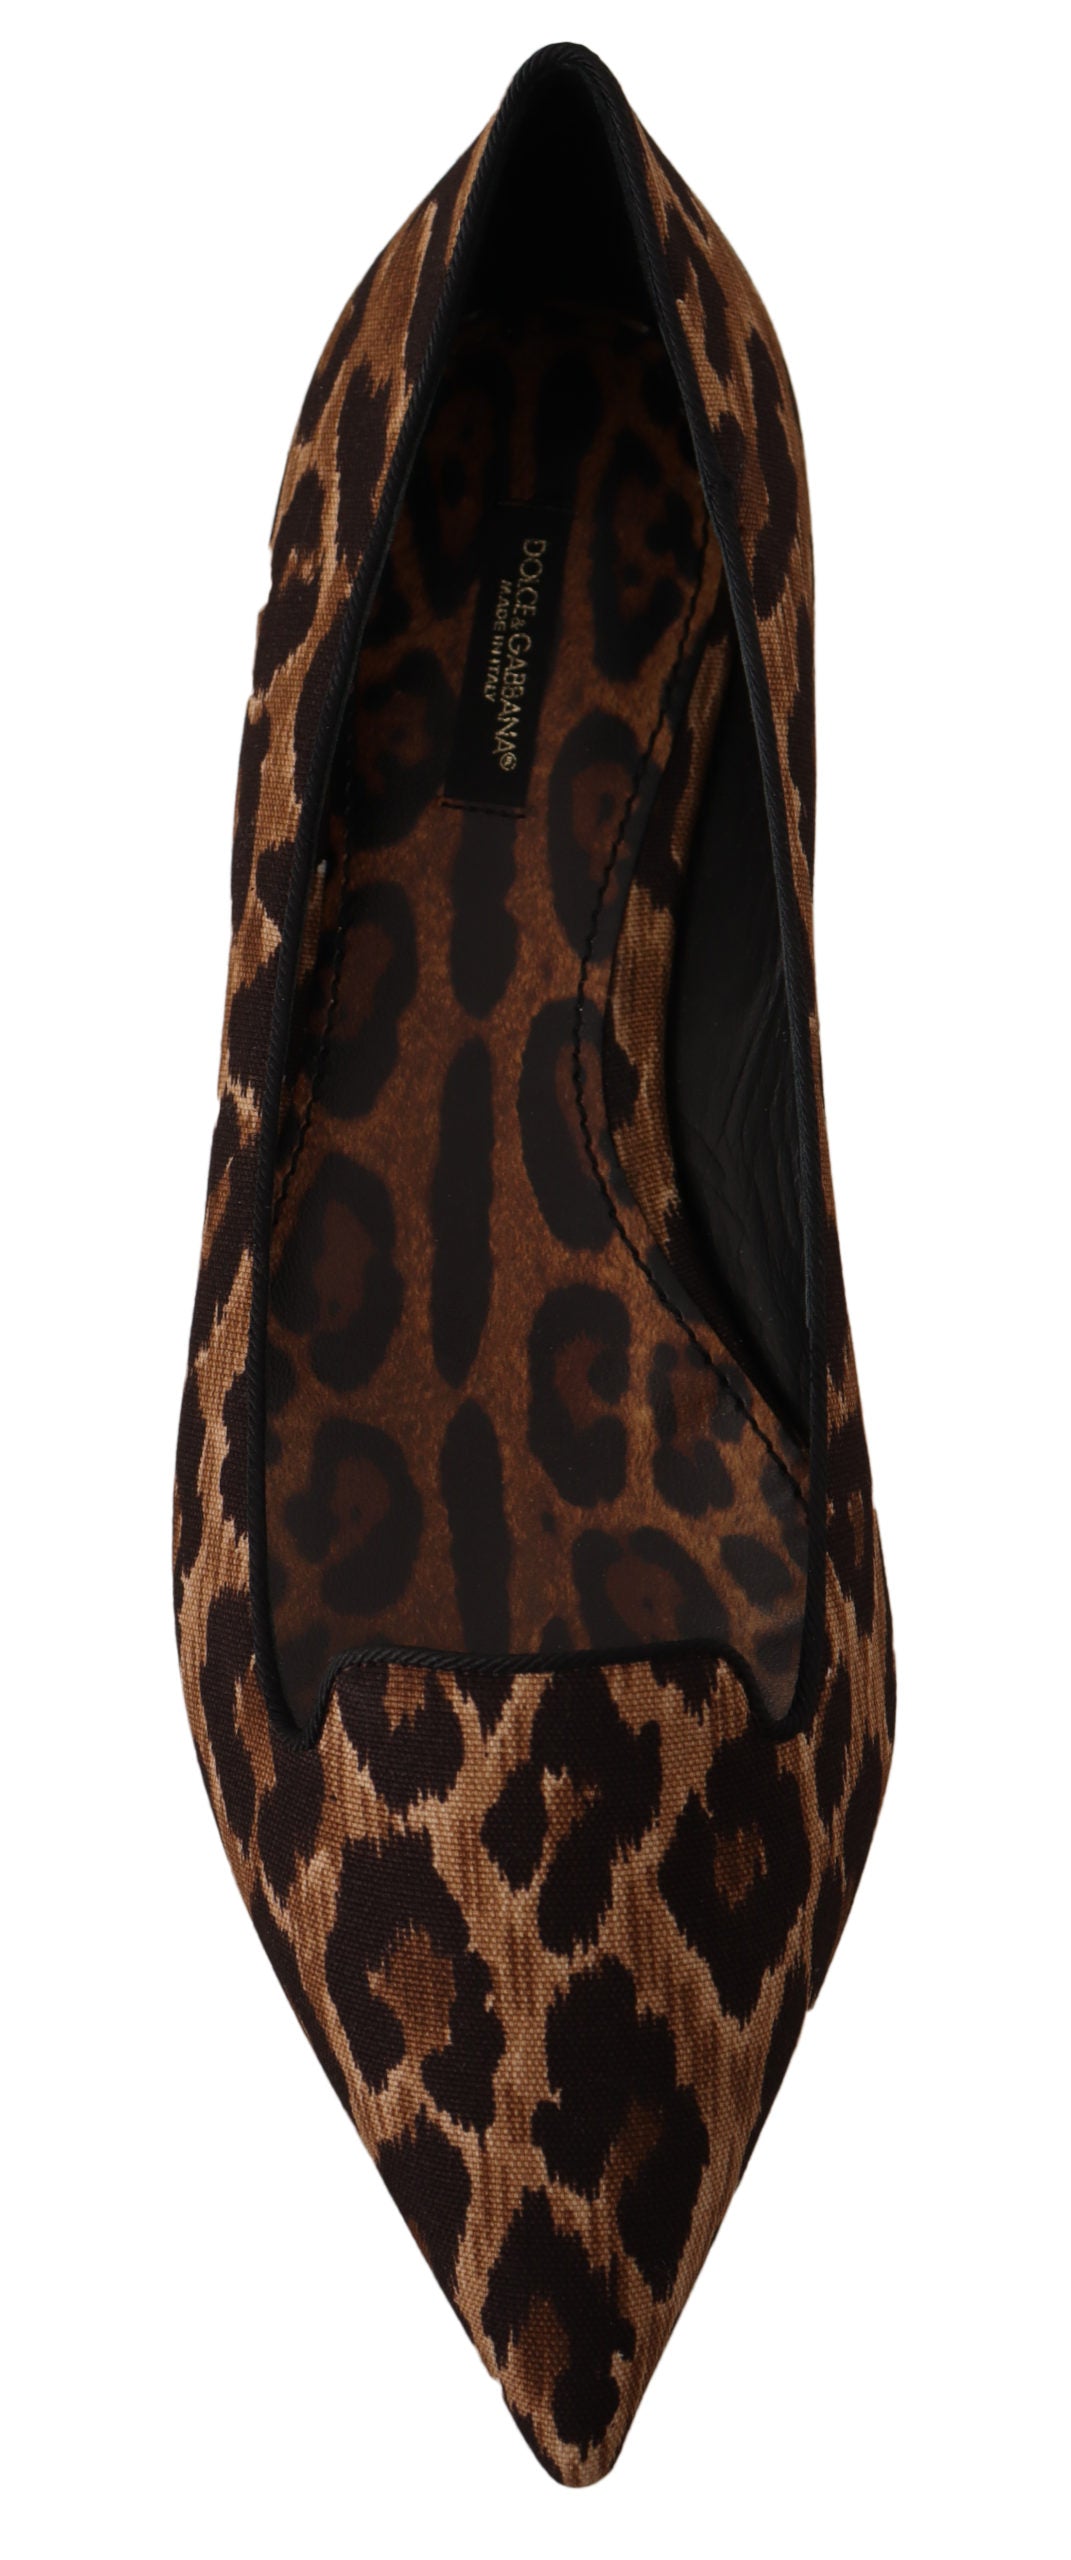 Brown Leopard Print Ballerina Loafers Shoes